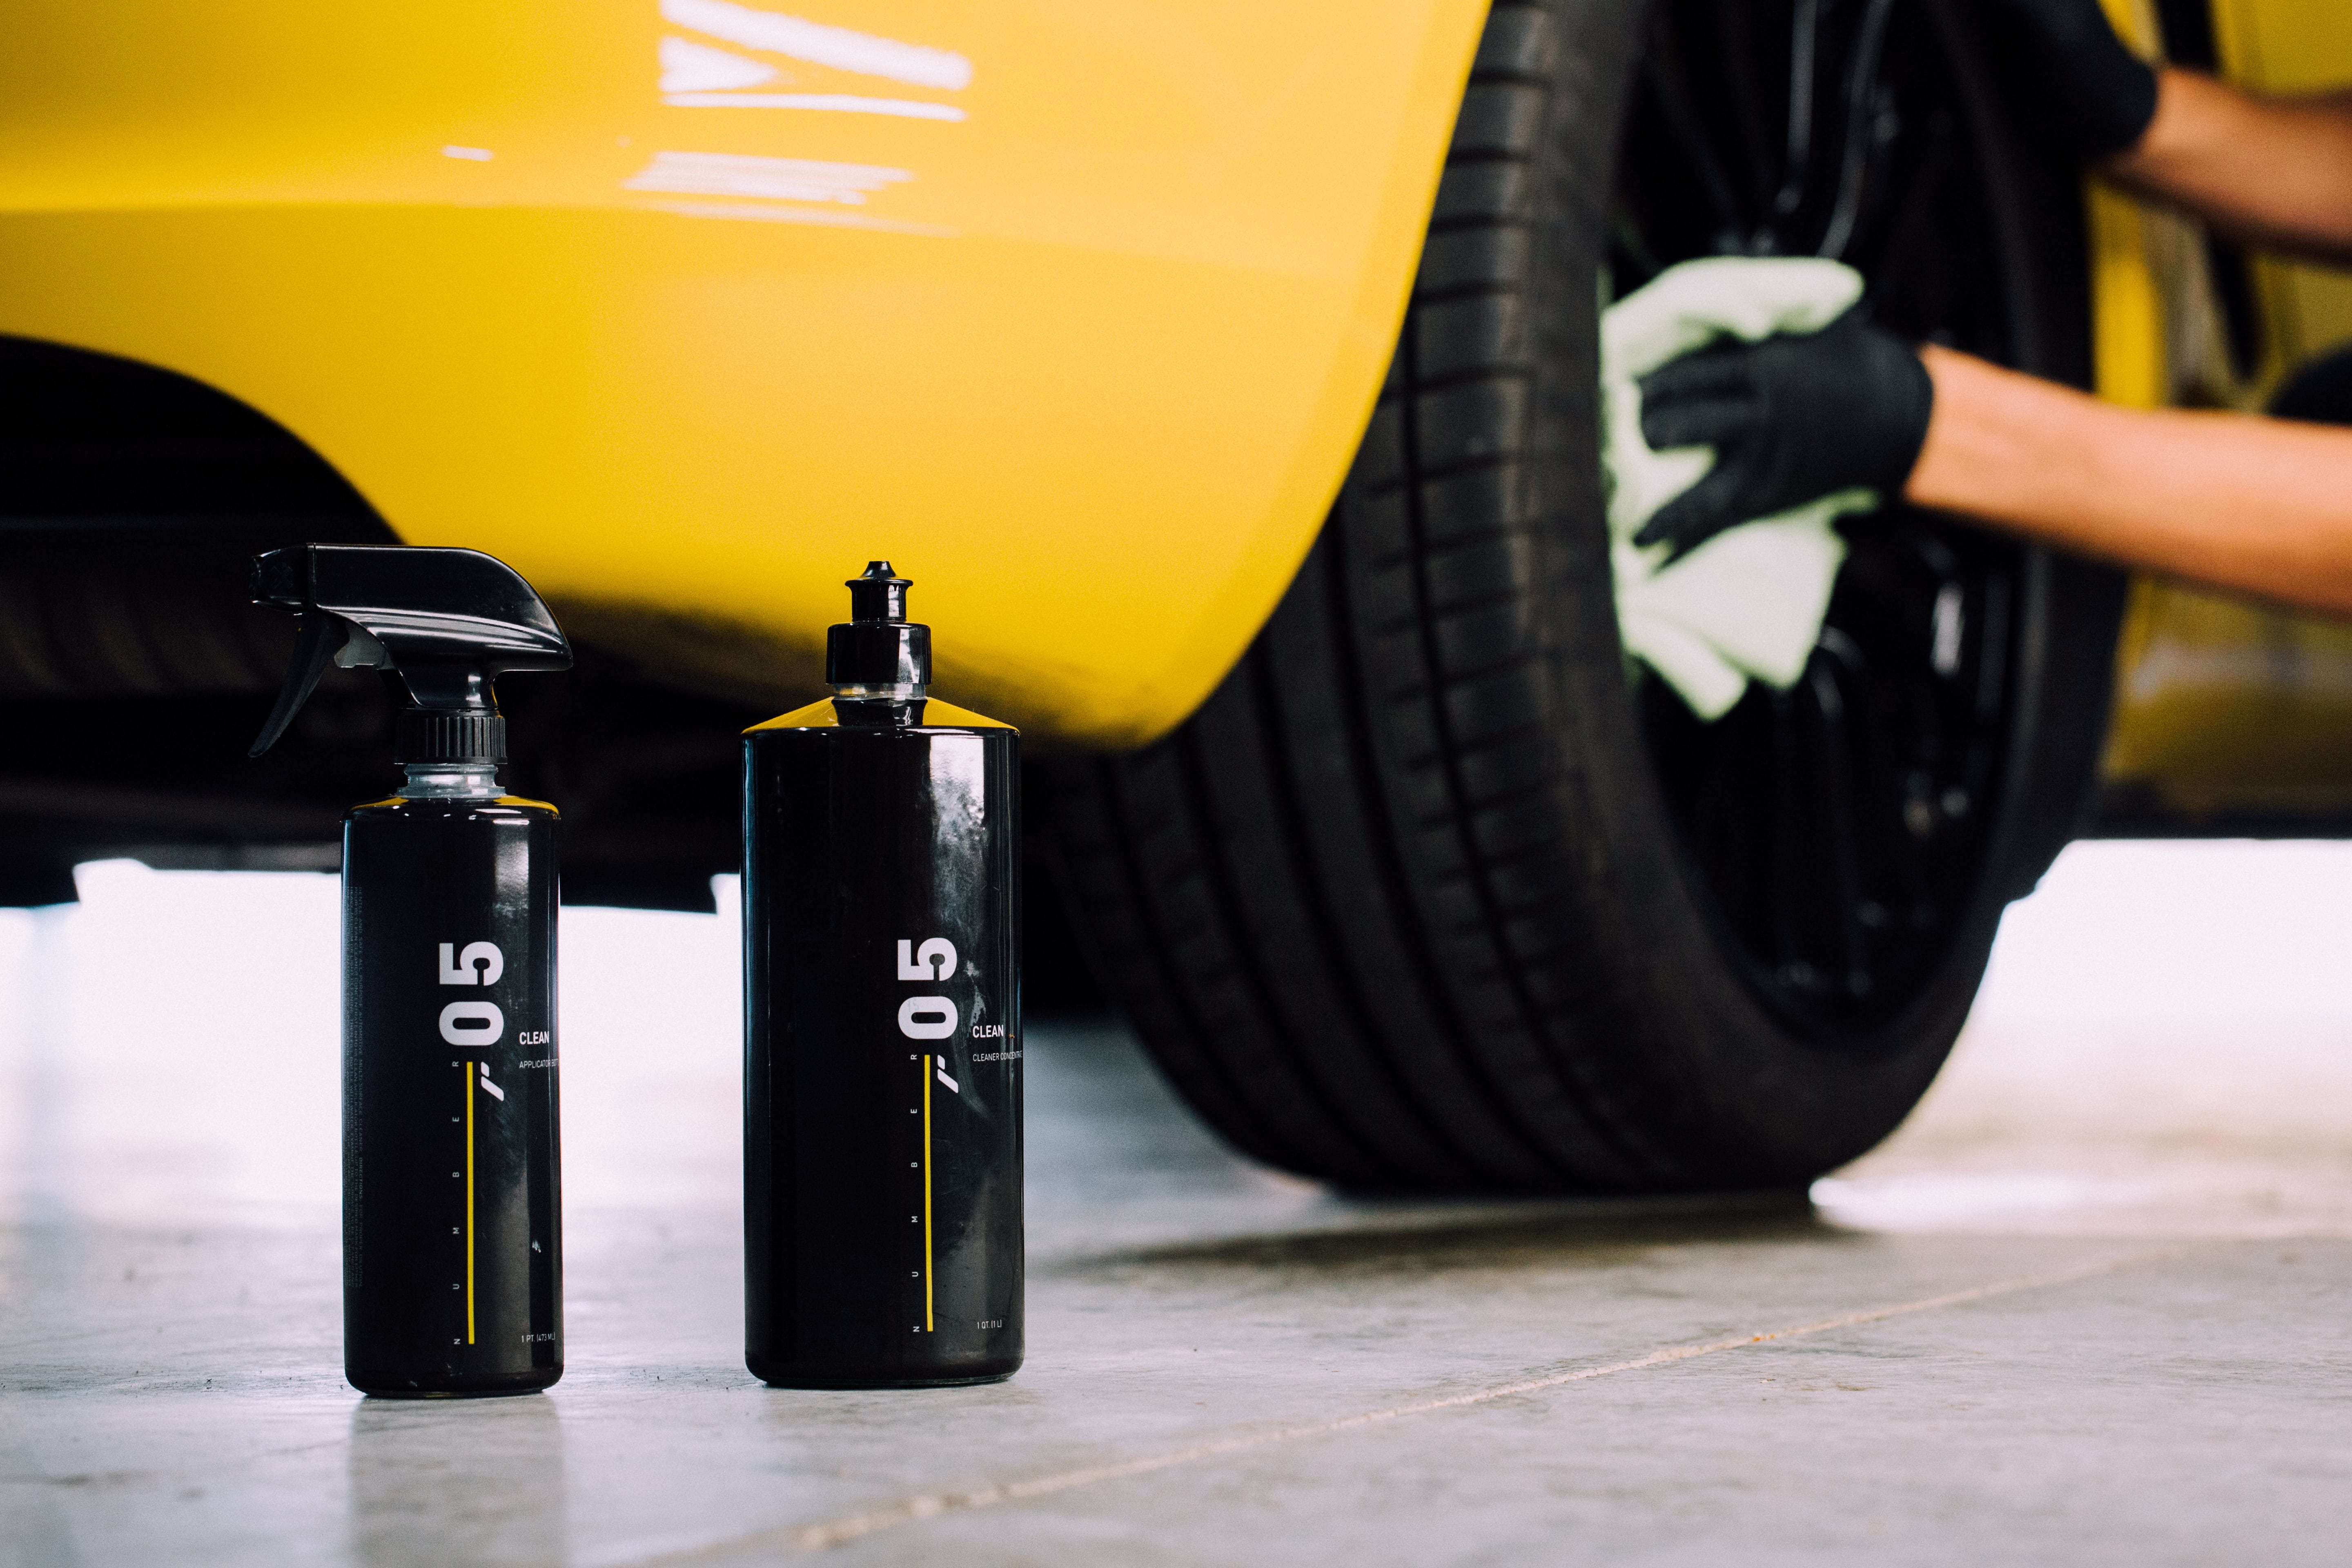 Numbers by RestorFX product and spray bottles used by a RestorFX technician detailing a bright yellow sports car